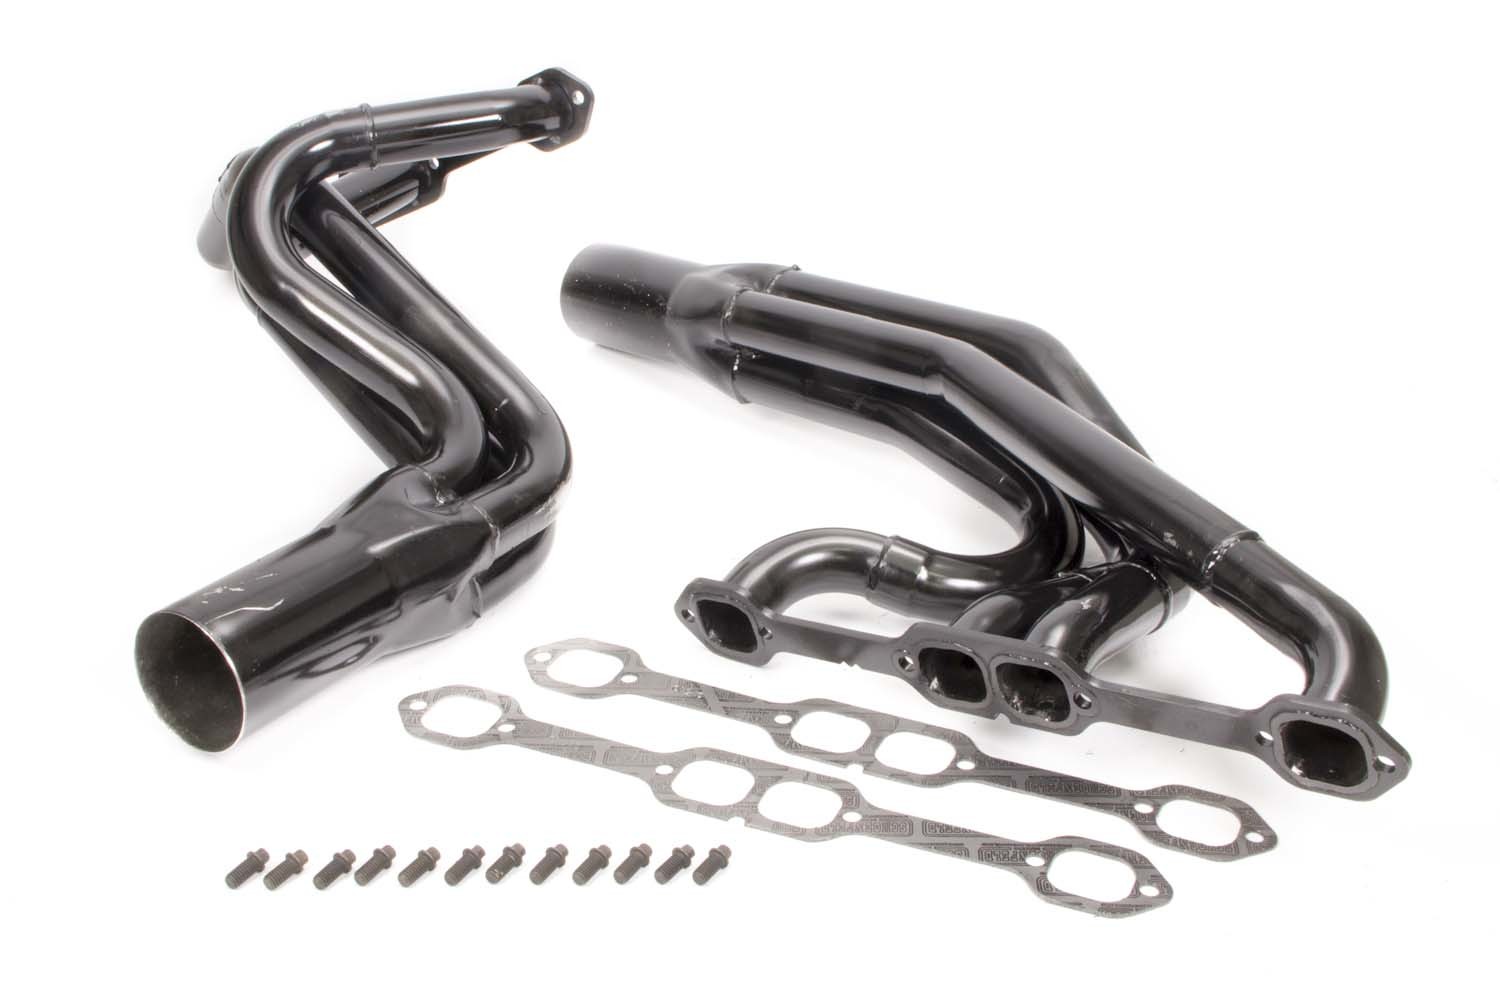 Schoenfeld Headers 142-525LV18 Headers, Dirt Late Model, 1-3/4 to 1-7/8 in Primary, 3-1/2 in Collector, Steel, Black Paint, Small Block Chevy, Pair